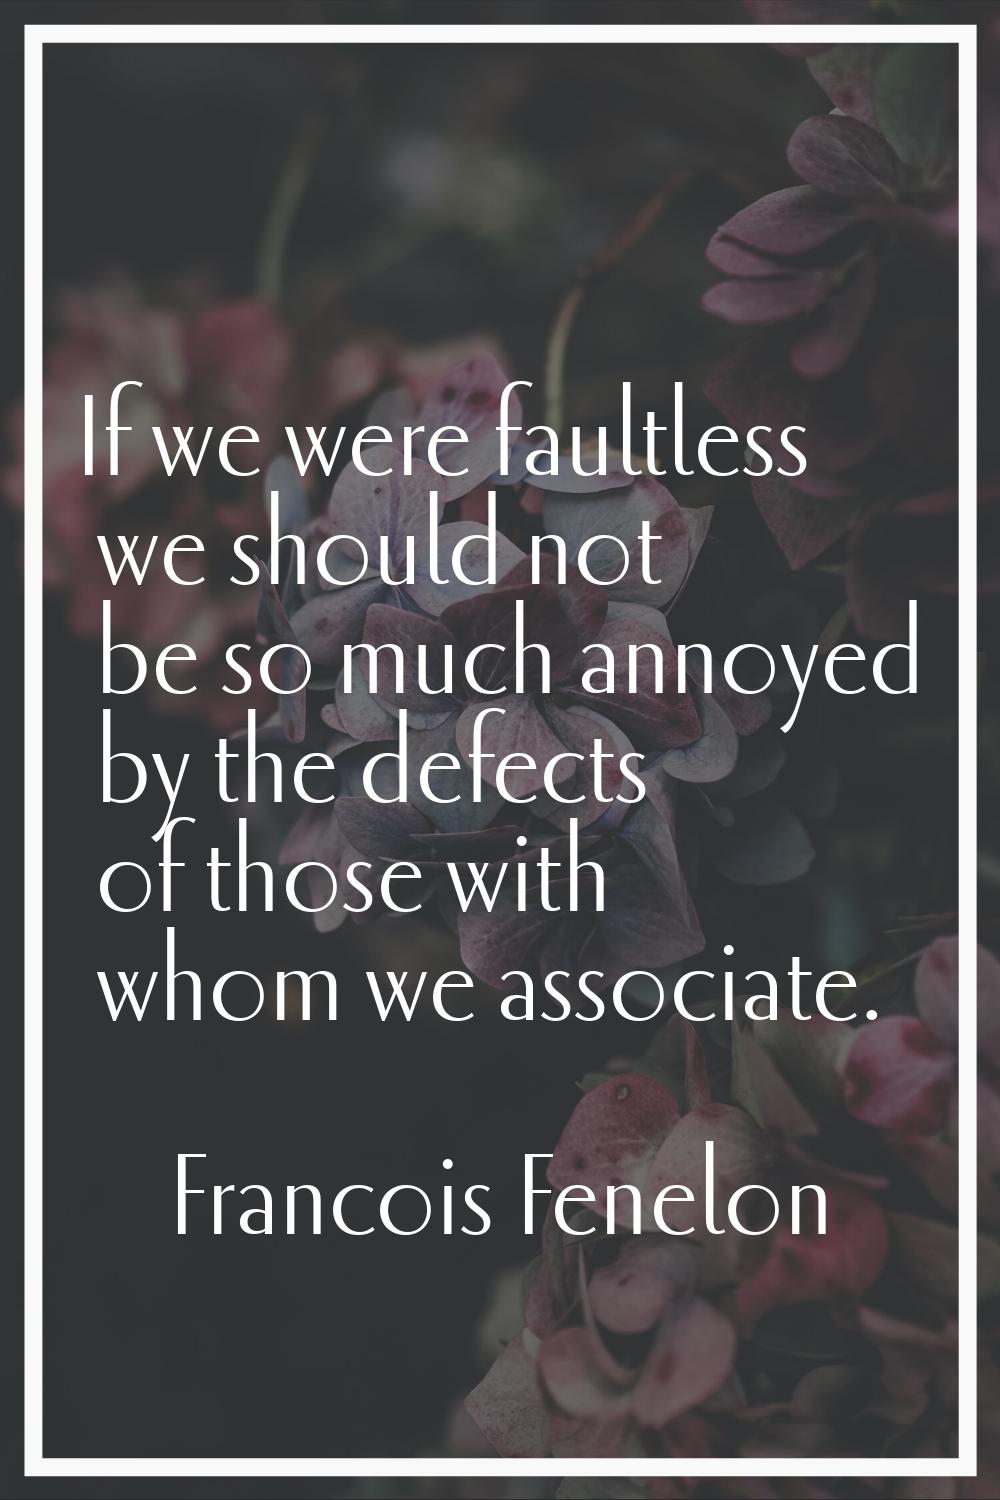 If we were faultless we should not be so much annoyed by the defects of those with whom we associat